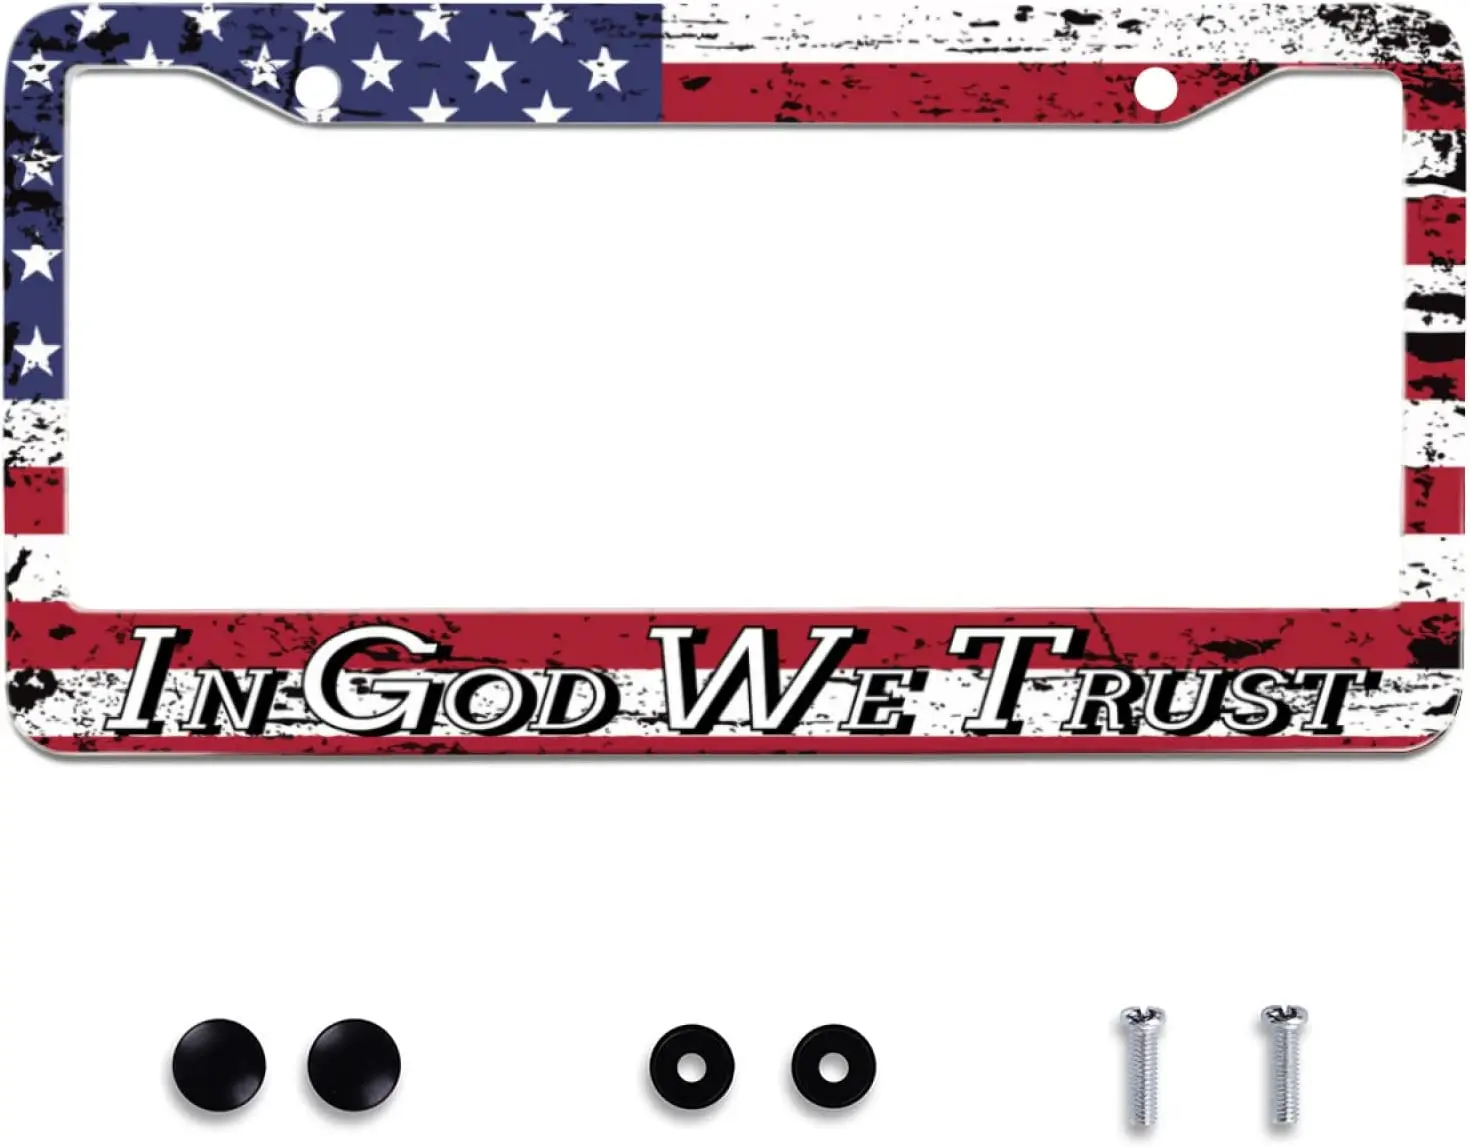 

Personalise In God We Trust Christian License Plate Frames Metal Car Universal Accessories Aluminum License Plate Cars Decor